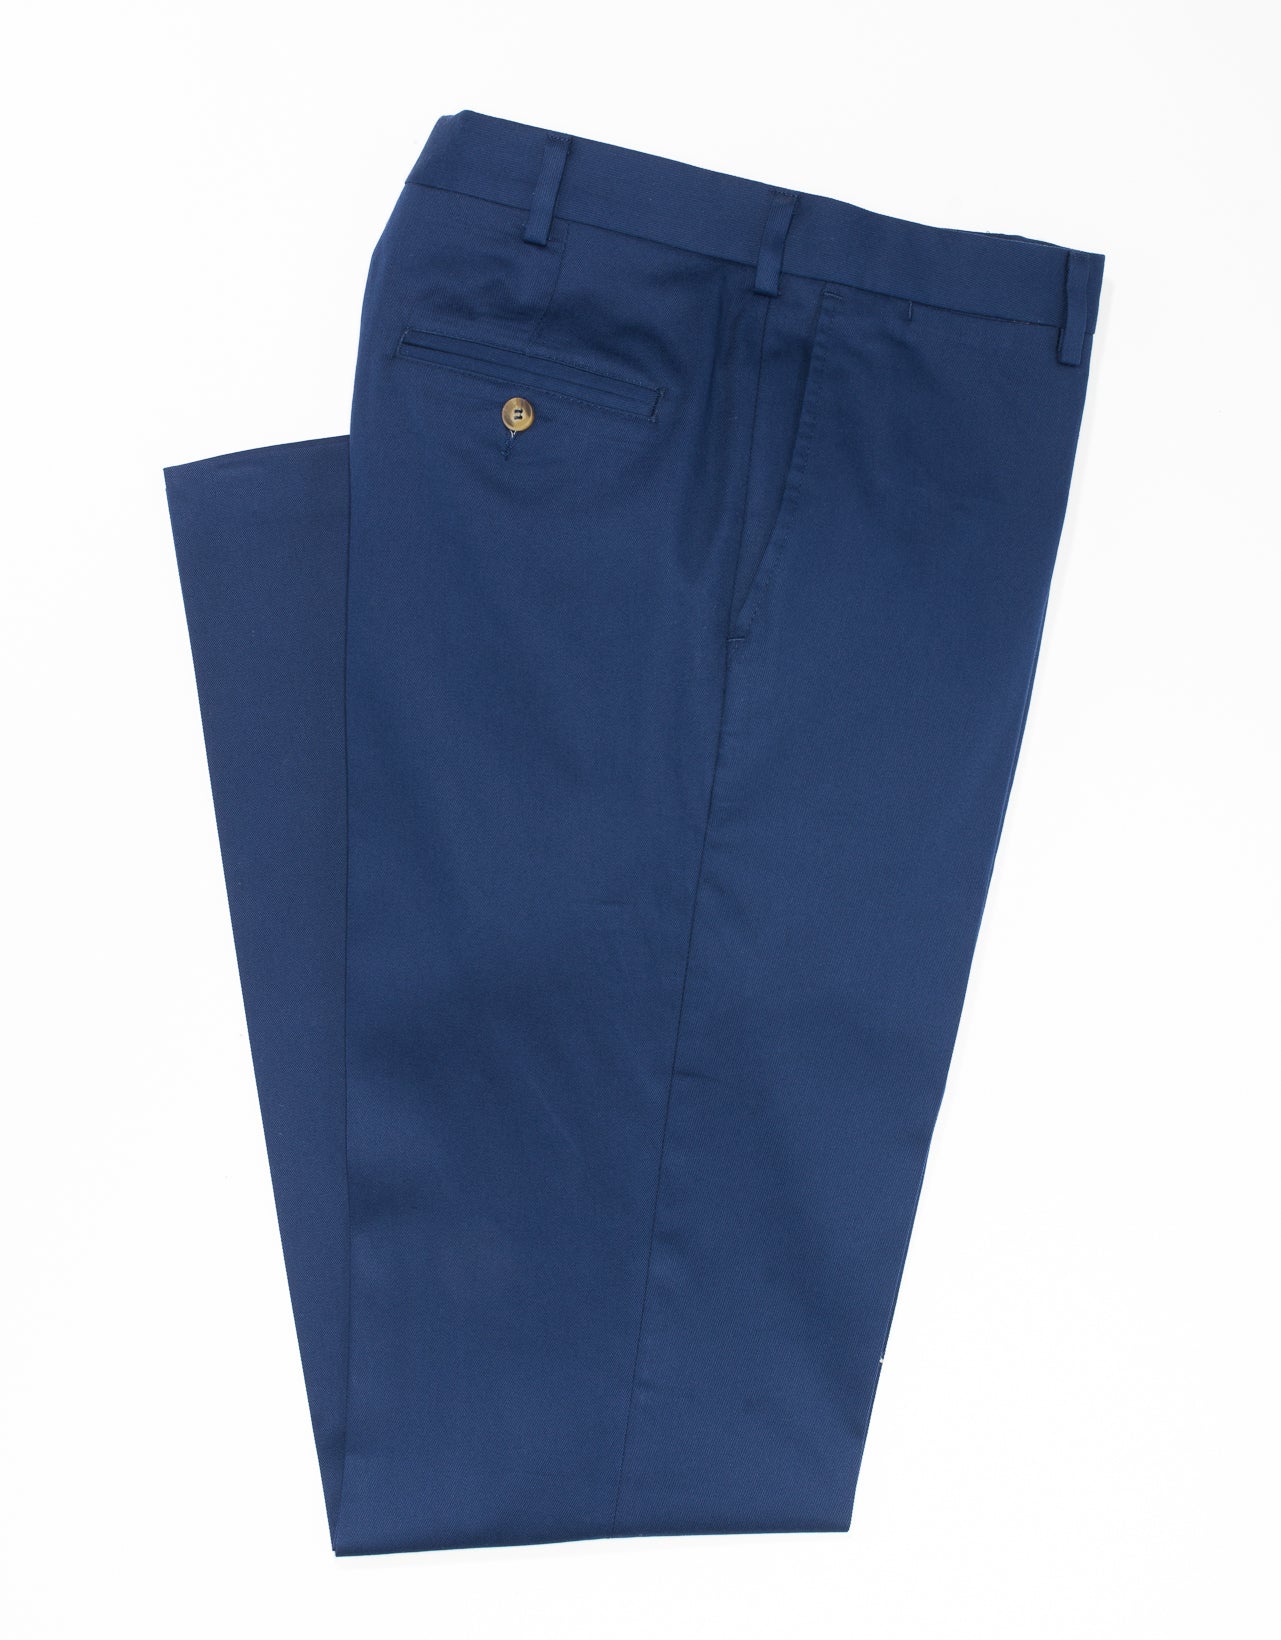 WASHED TWILL CHINO CLASSIC TROUSERS - NAVY